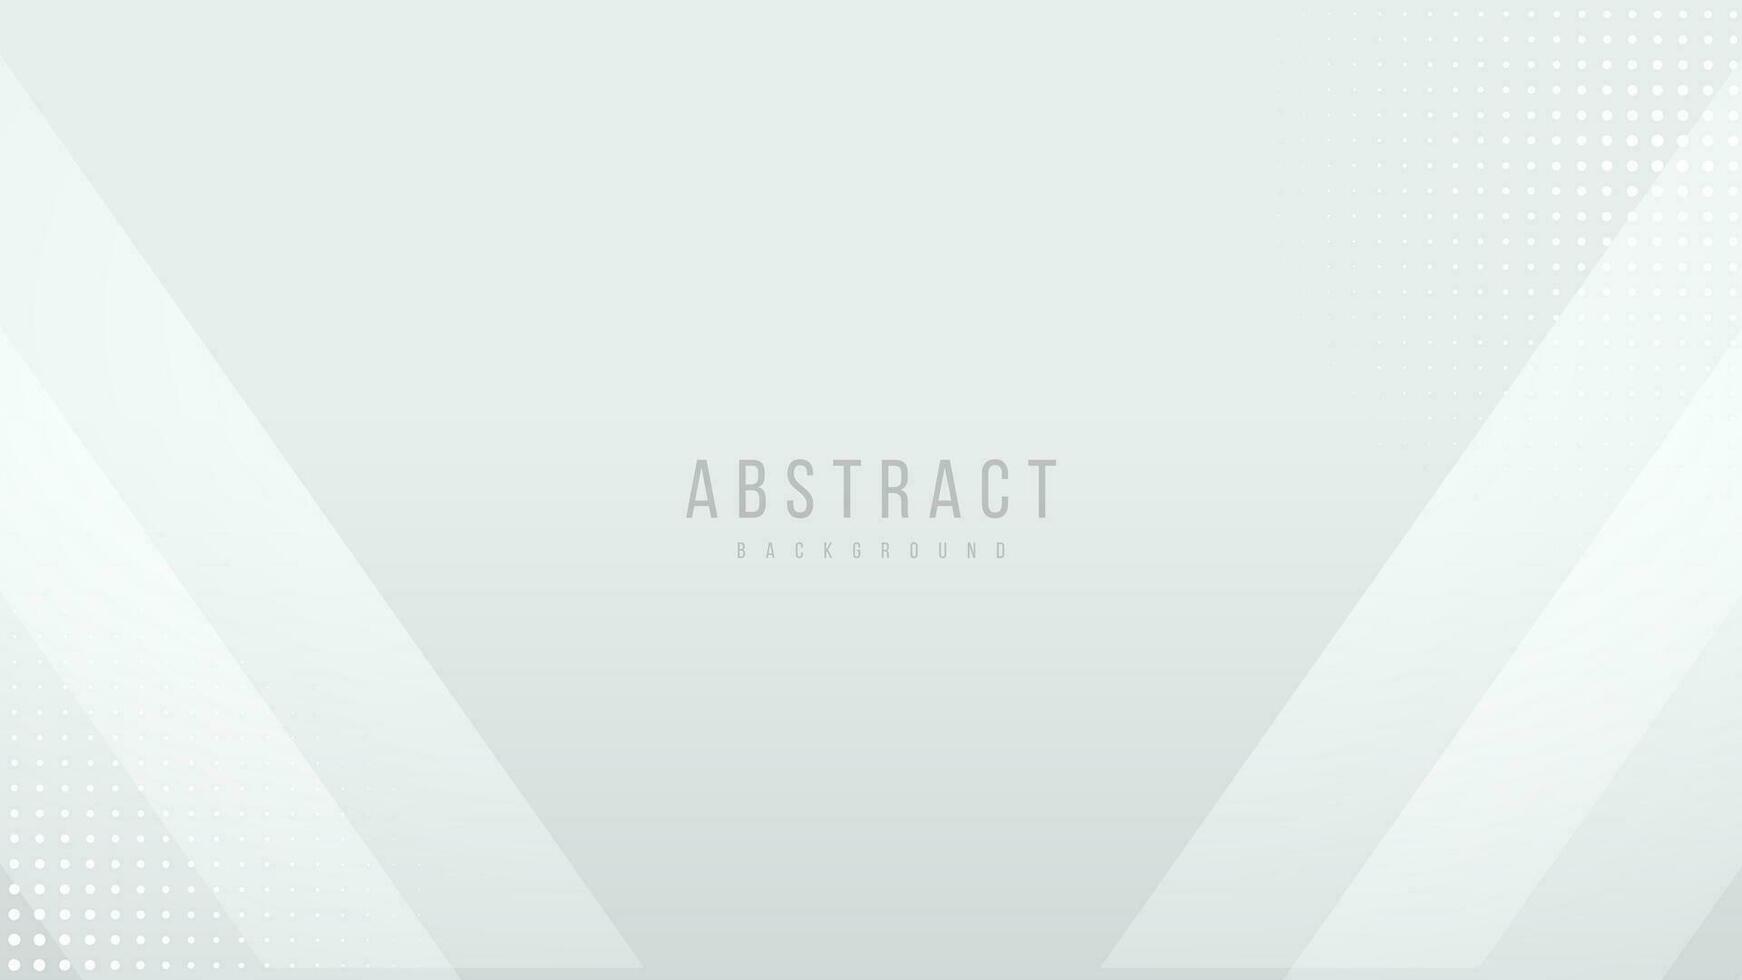 Abstract white and grey background vector design